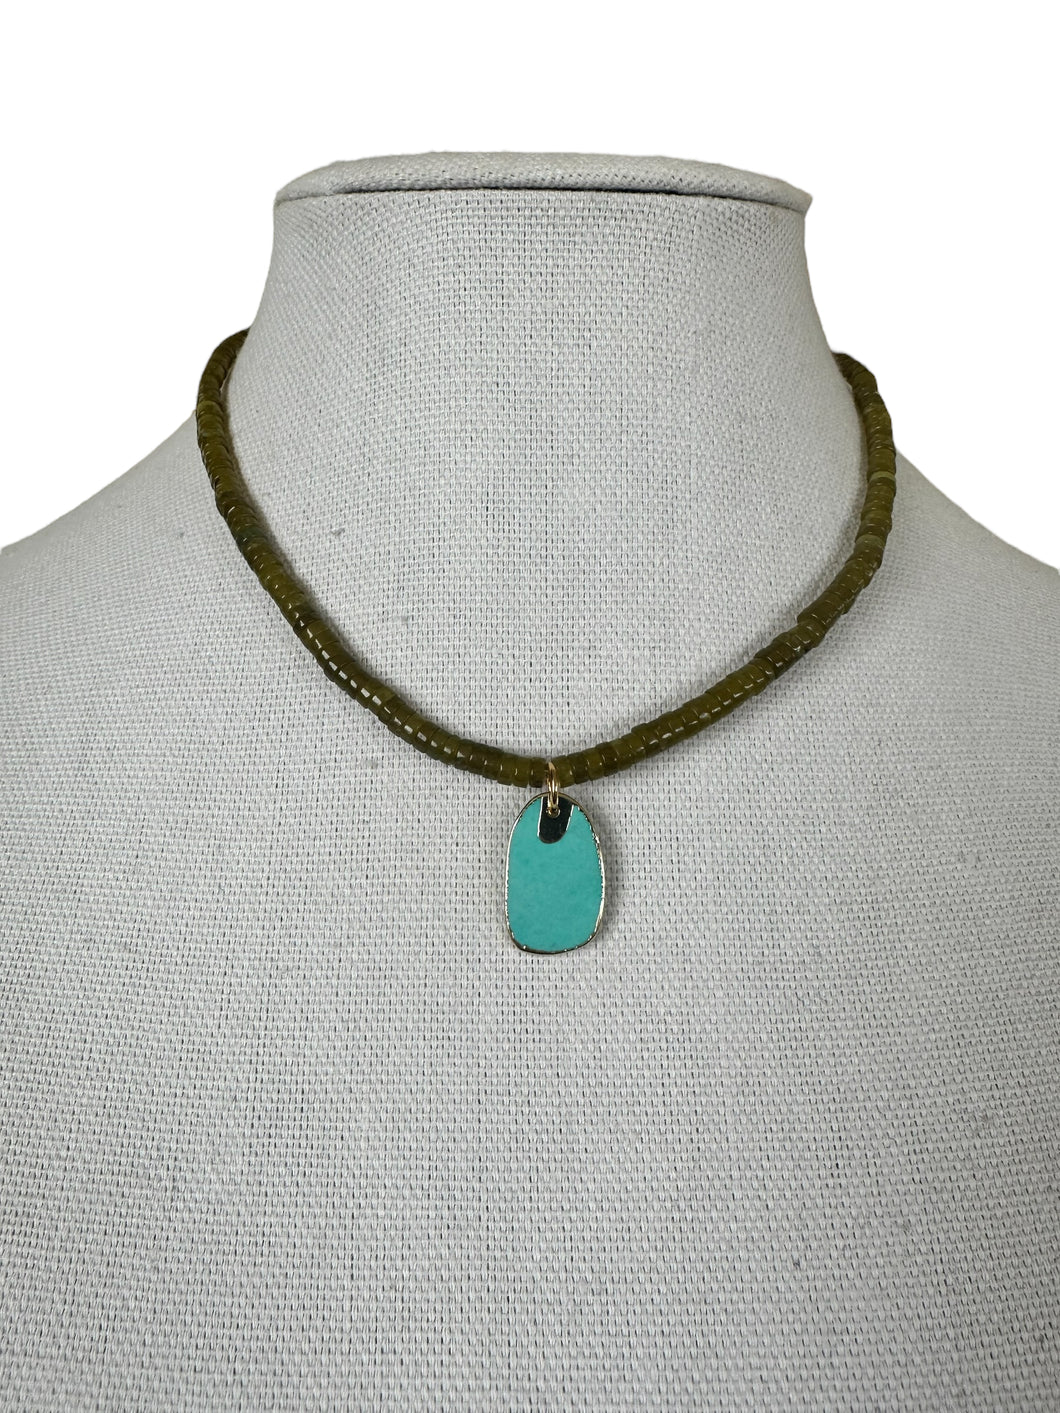 Natural Olive Green Jade Neklace with Turquoise Pendant